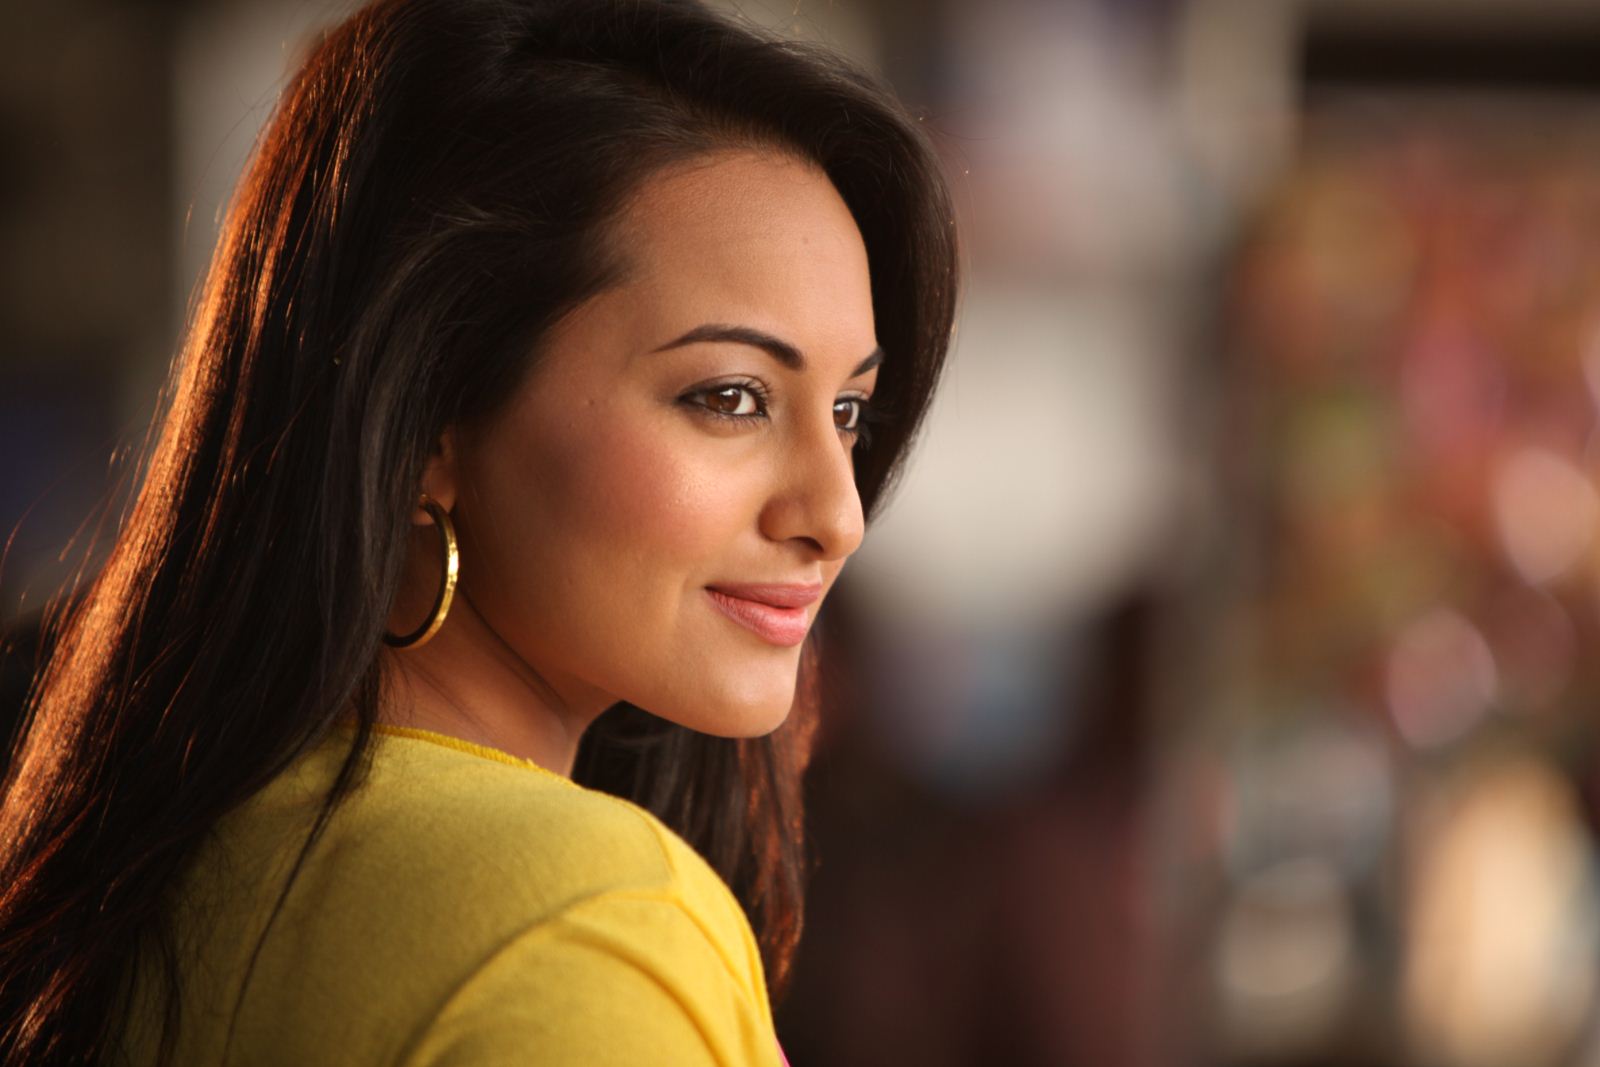 No lack of work because of two extra inches on my waist: Sonakshi Sinha